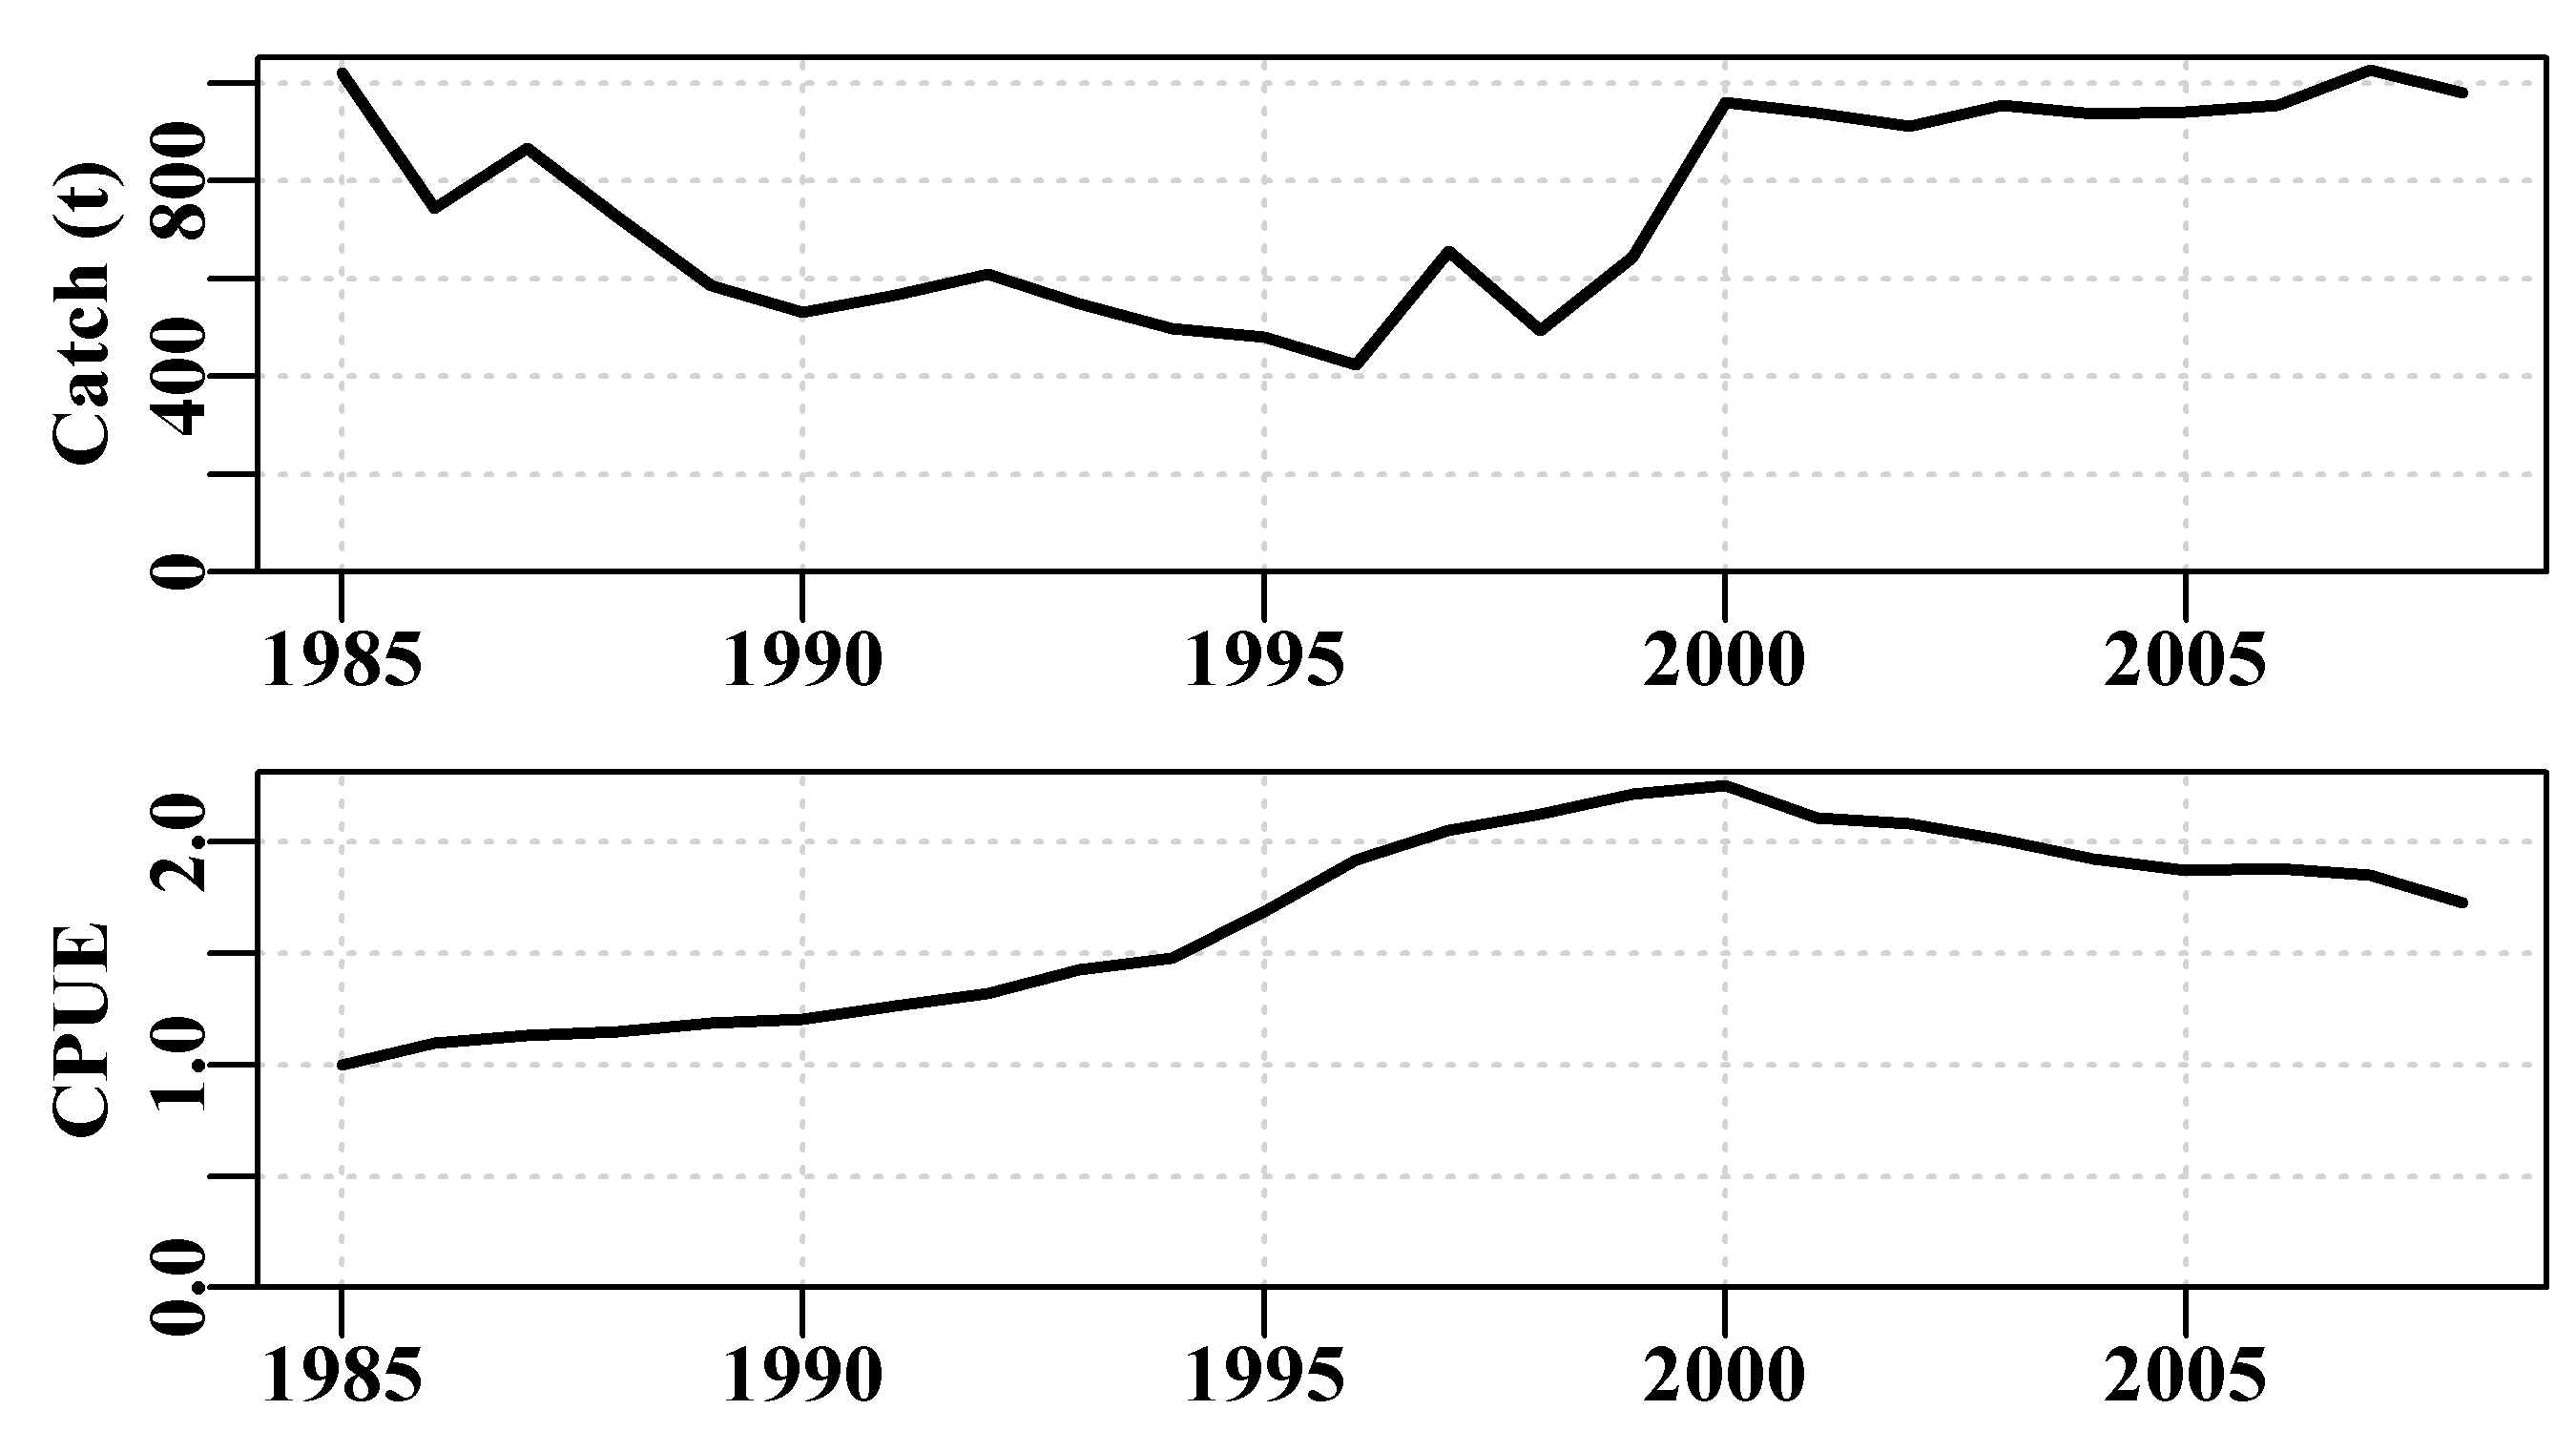 The time-series of cpue and catch from the abdat data set.